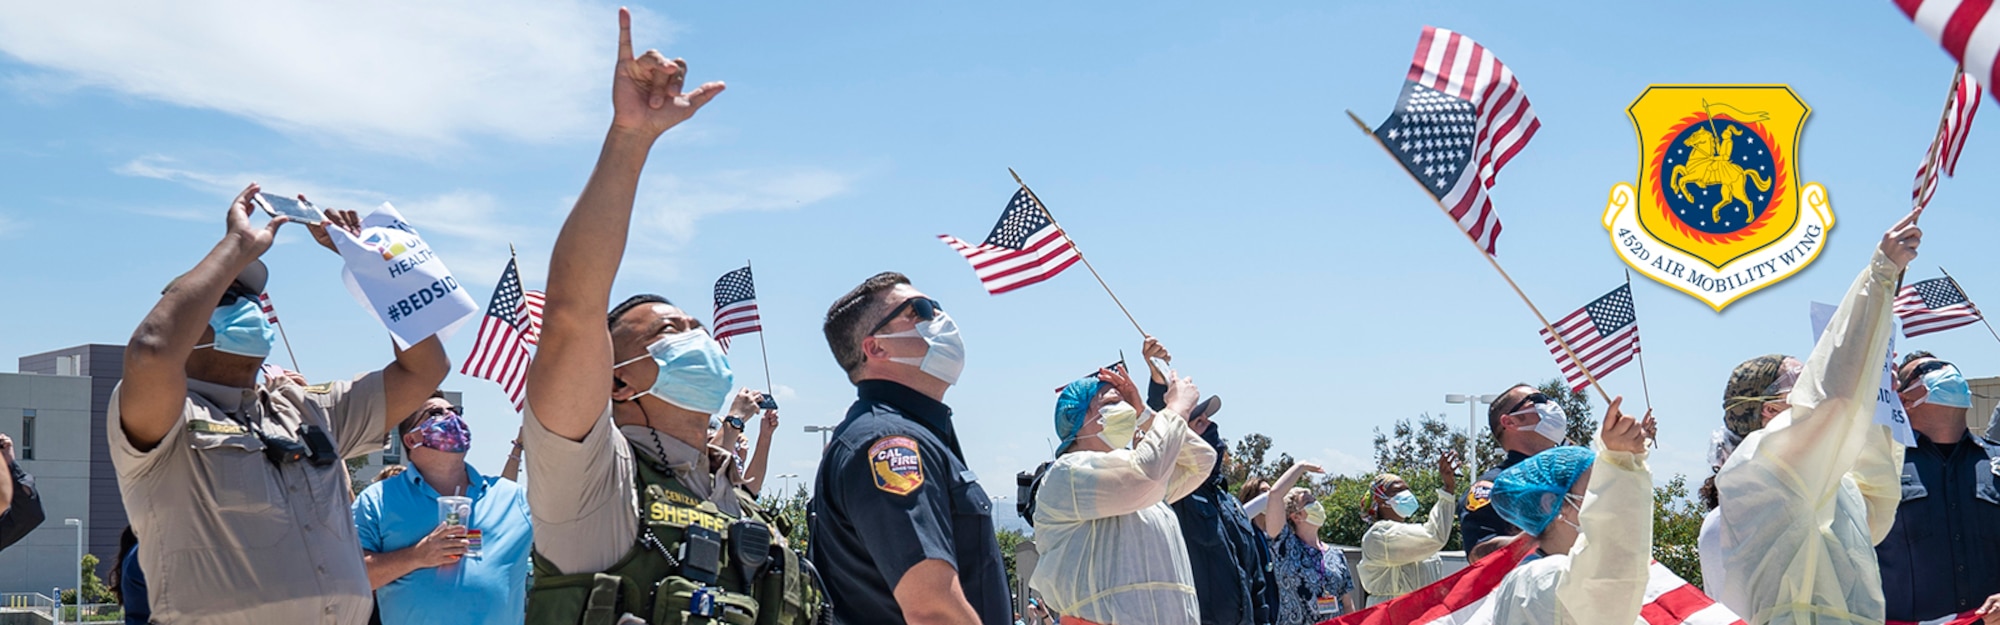 Medical, law enforcement and firefighter personnel wave and cheer as a KC-135 Stratotanker flies over the crowd at the Riverside University Health System Medical Center in Moreno Valley, California on May 14, 2020. The 452nd Air Mobility Wing participated in the #AirForceSalutes portion of #AmericaStrong, honoring local healthcare workers, essential employees, and other first responders on the front line of the battle against COVID-19 with two flyovers. (US Air Force photo by Tech. Sgt. Nick Kibbey)